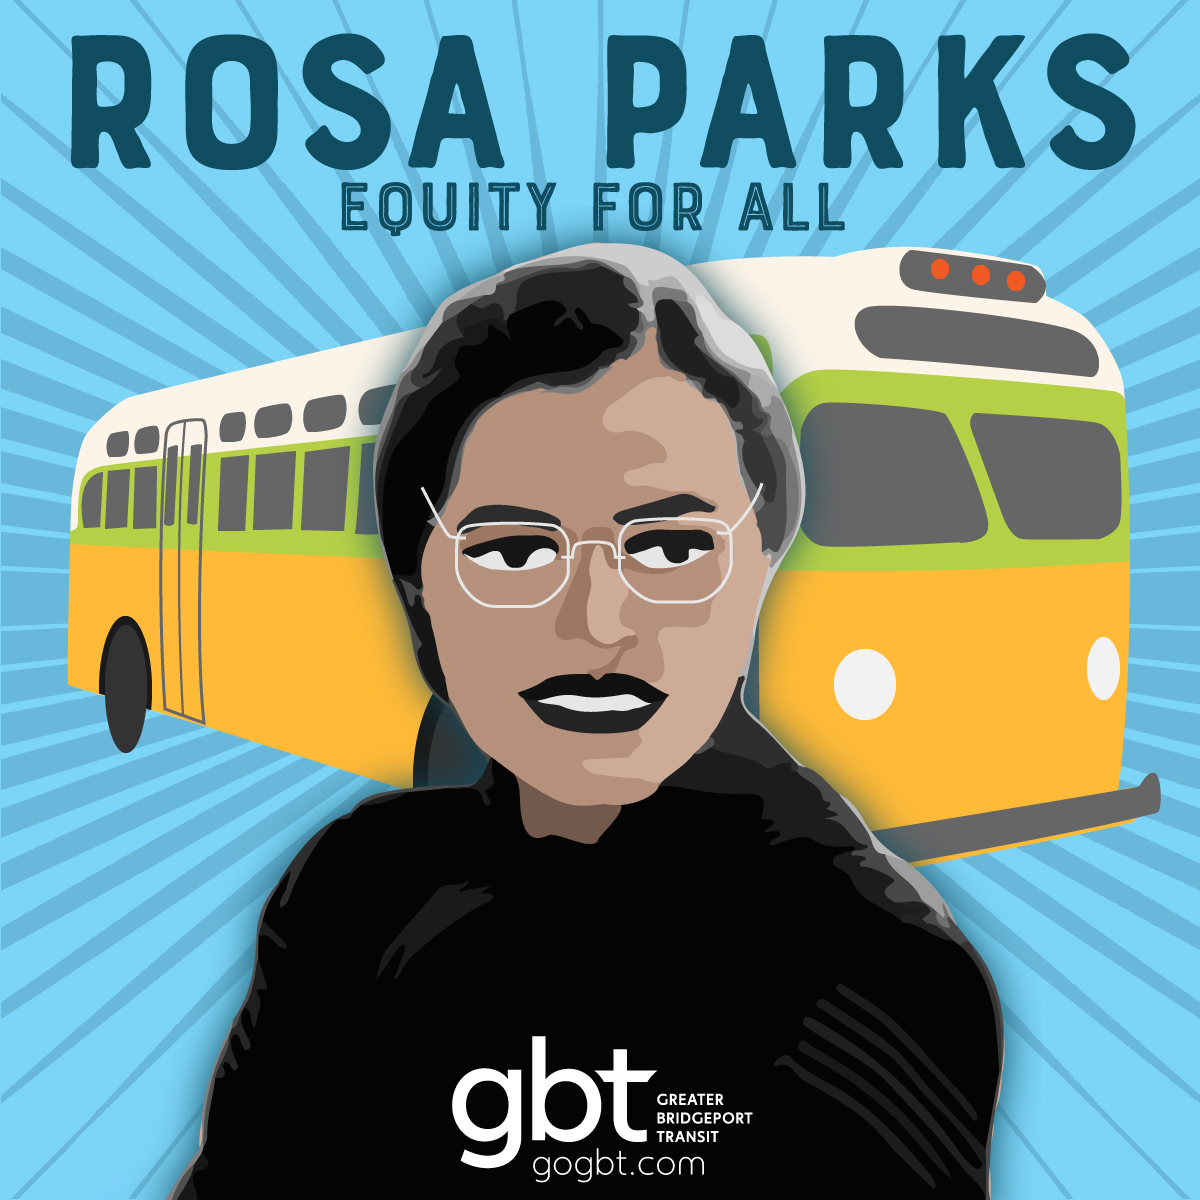 Honoring Rosa Parks ???‍??‍???‍?? Take A Seat For Transit Equity